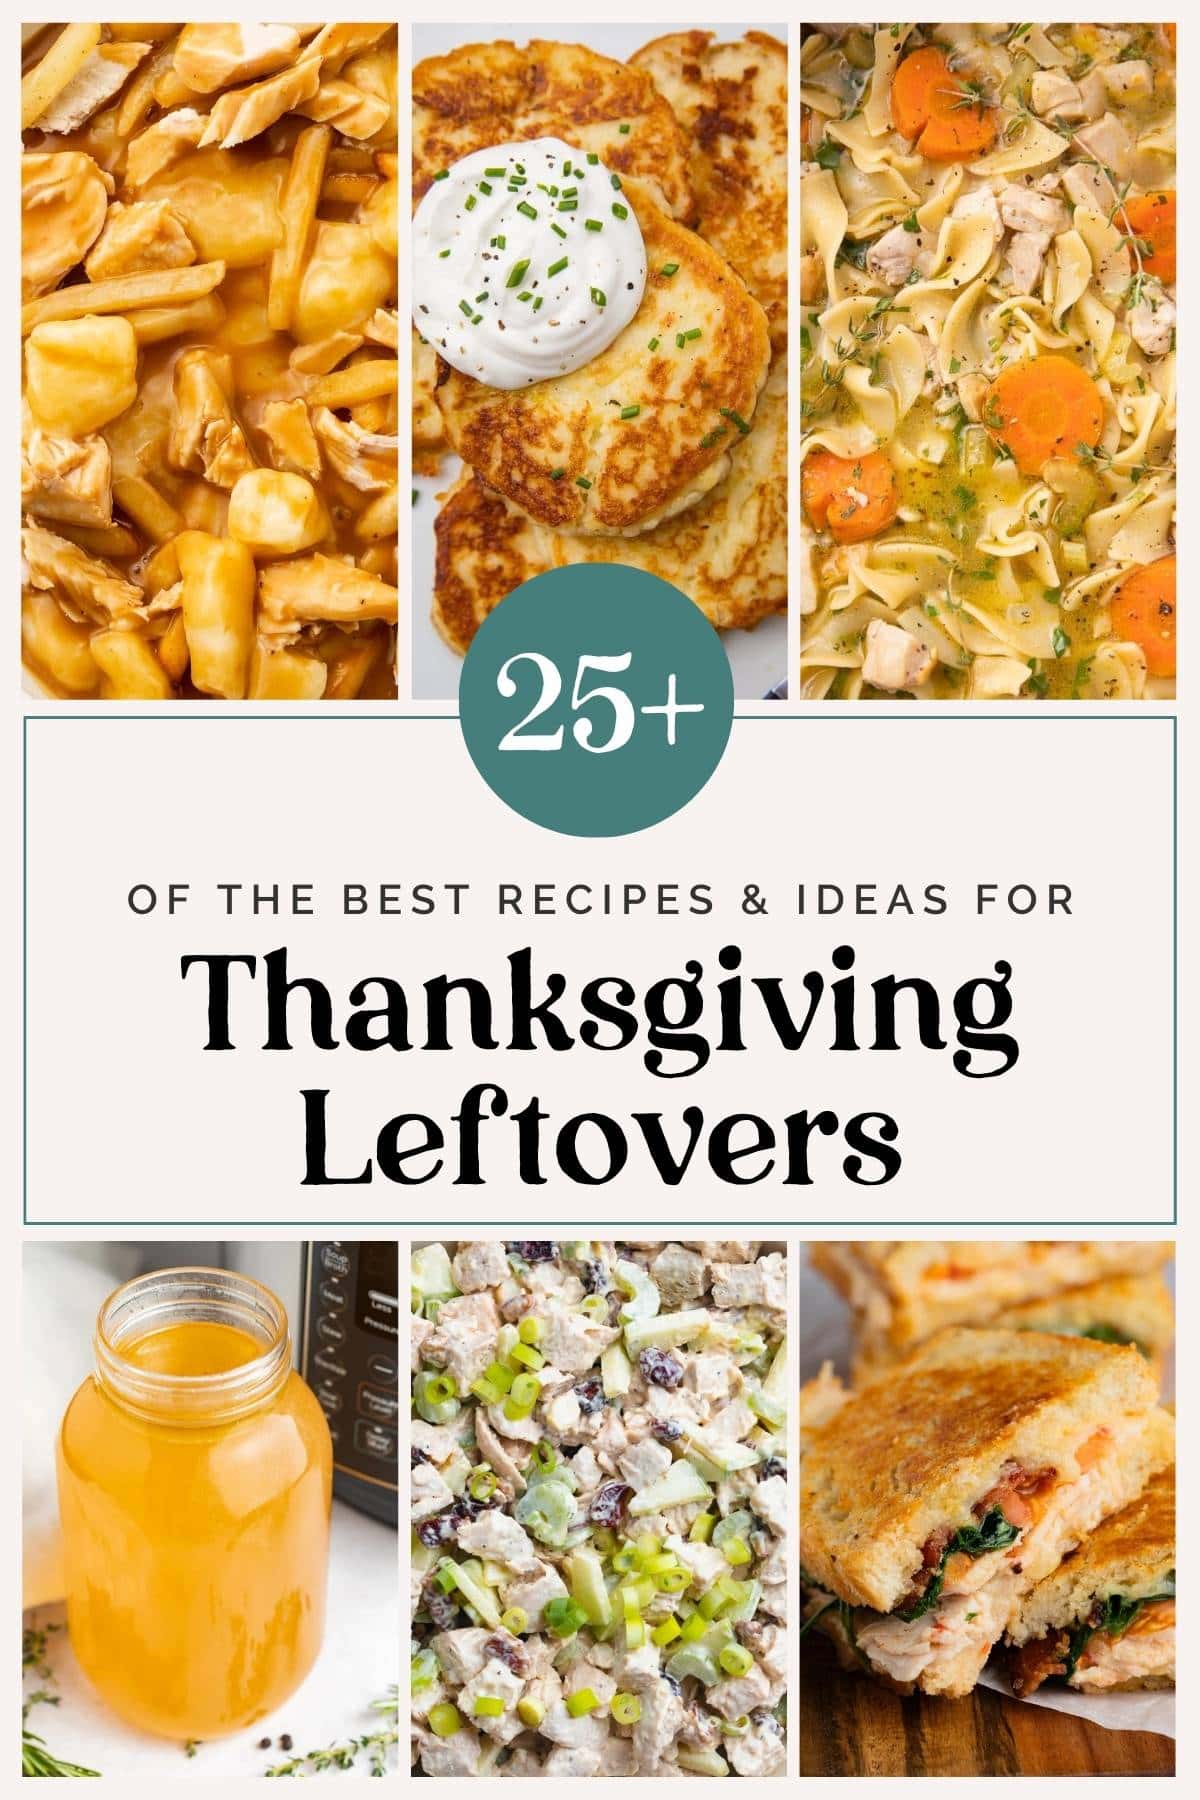 Roundup cover for 25+ of the best Thanksgiving leftovers recipes.